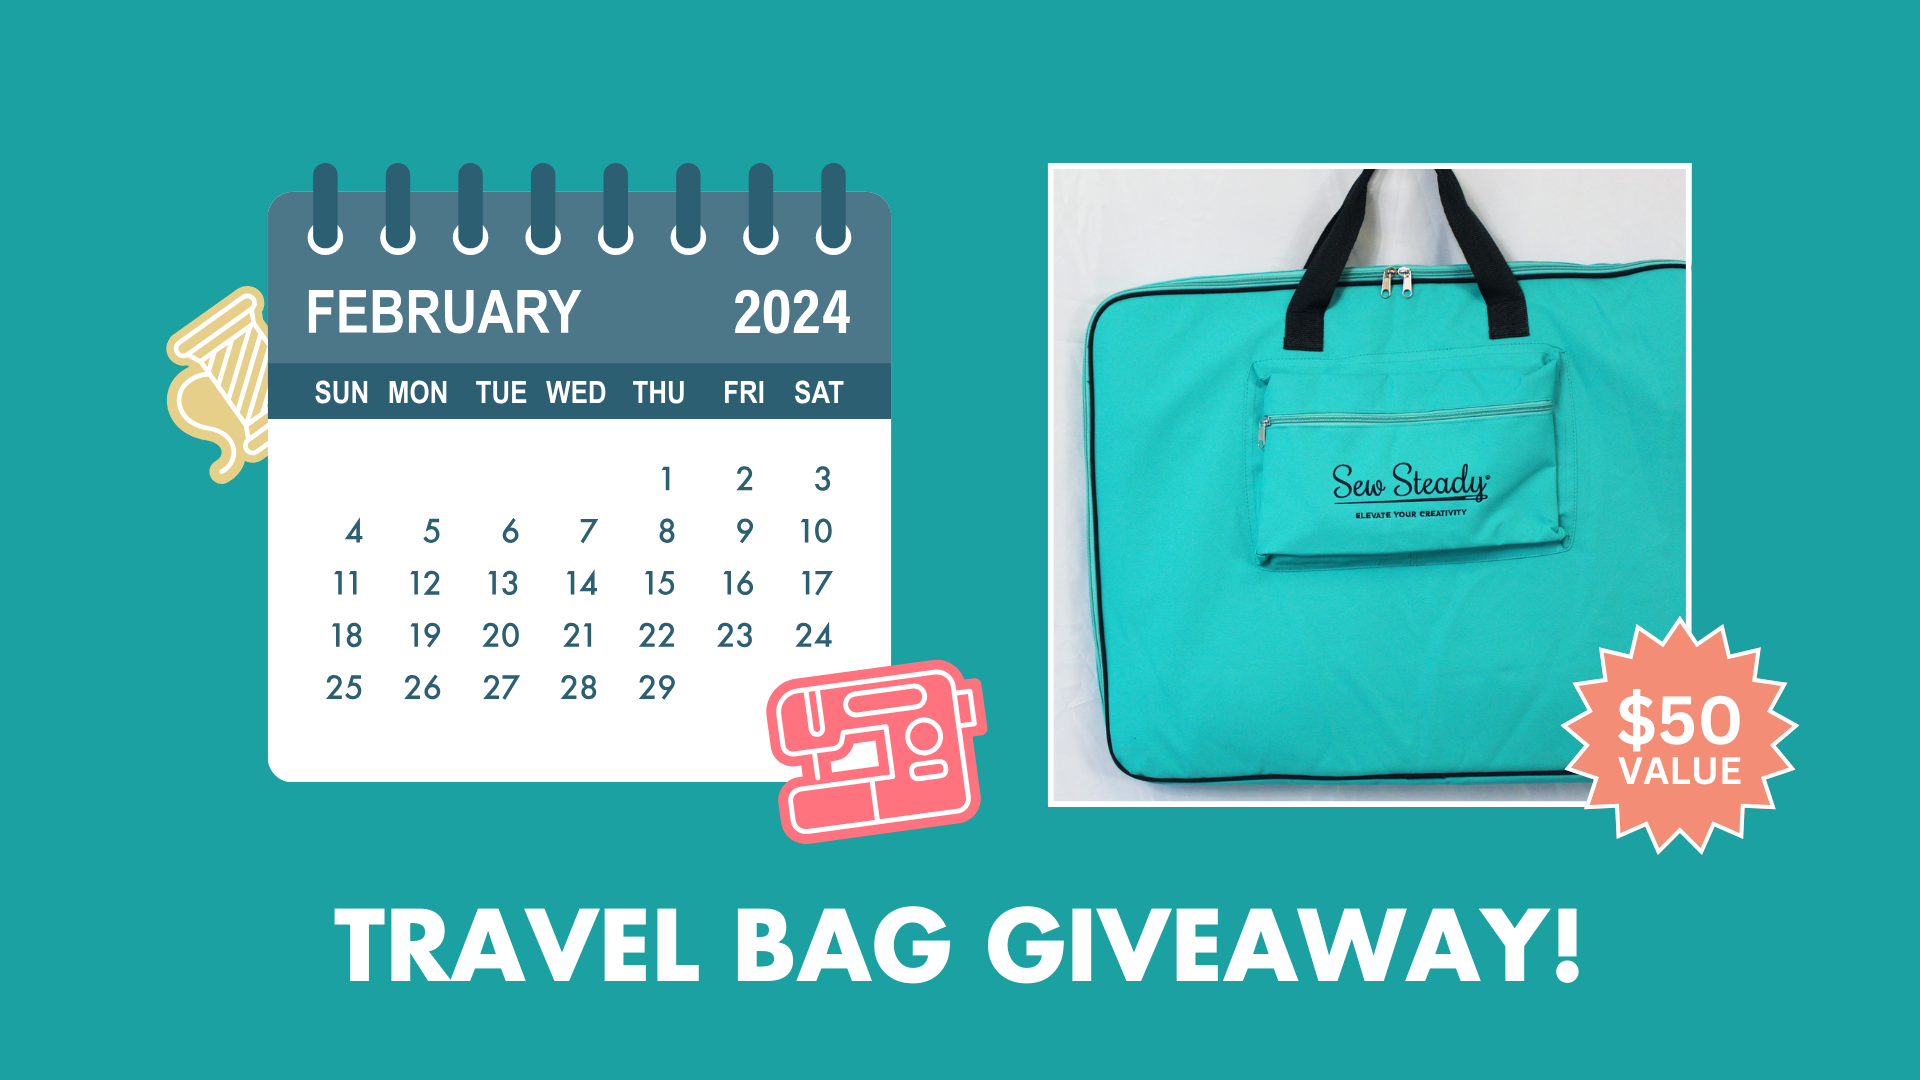 Want a chance to win a Sew Steady Travel Bag?